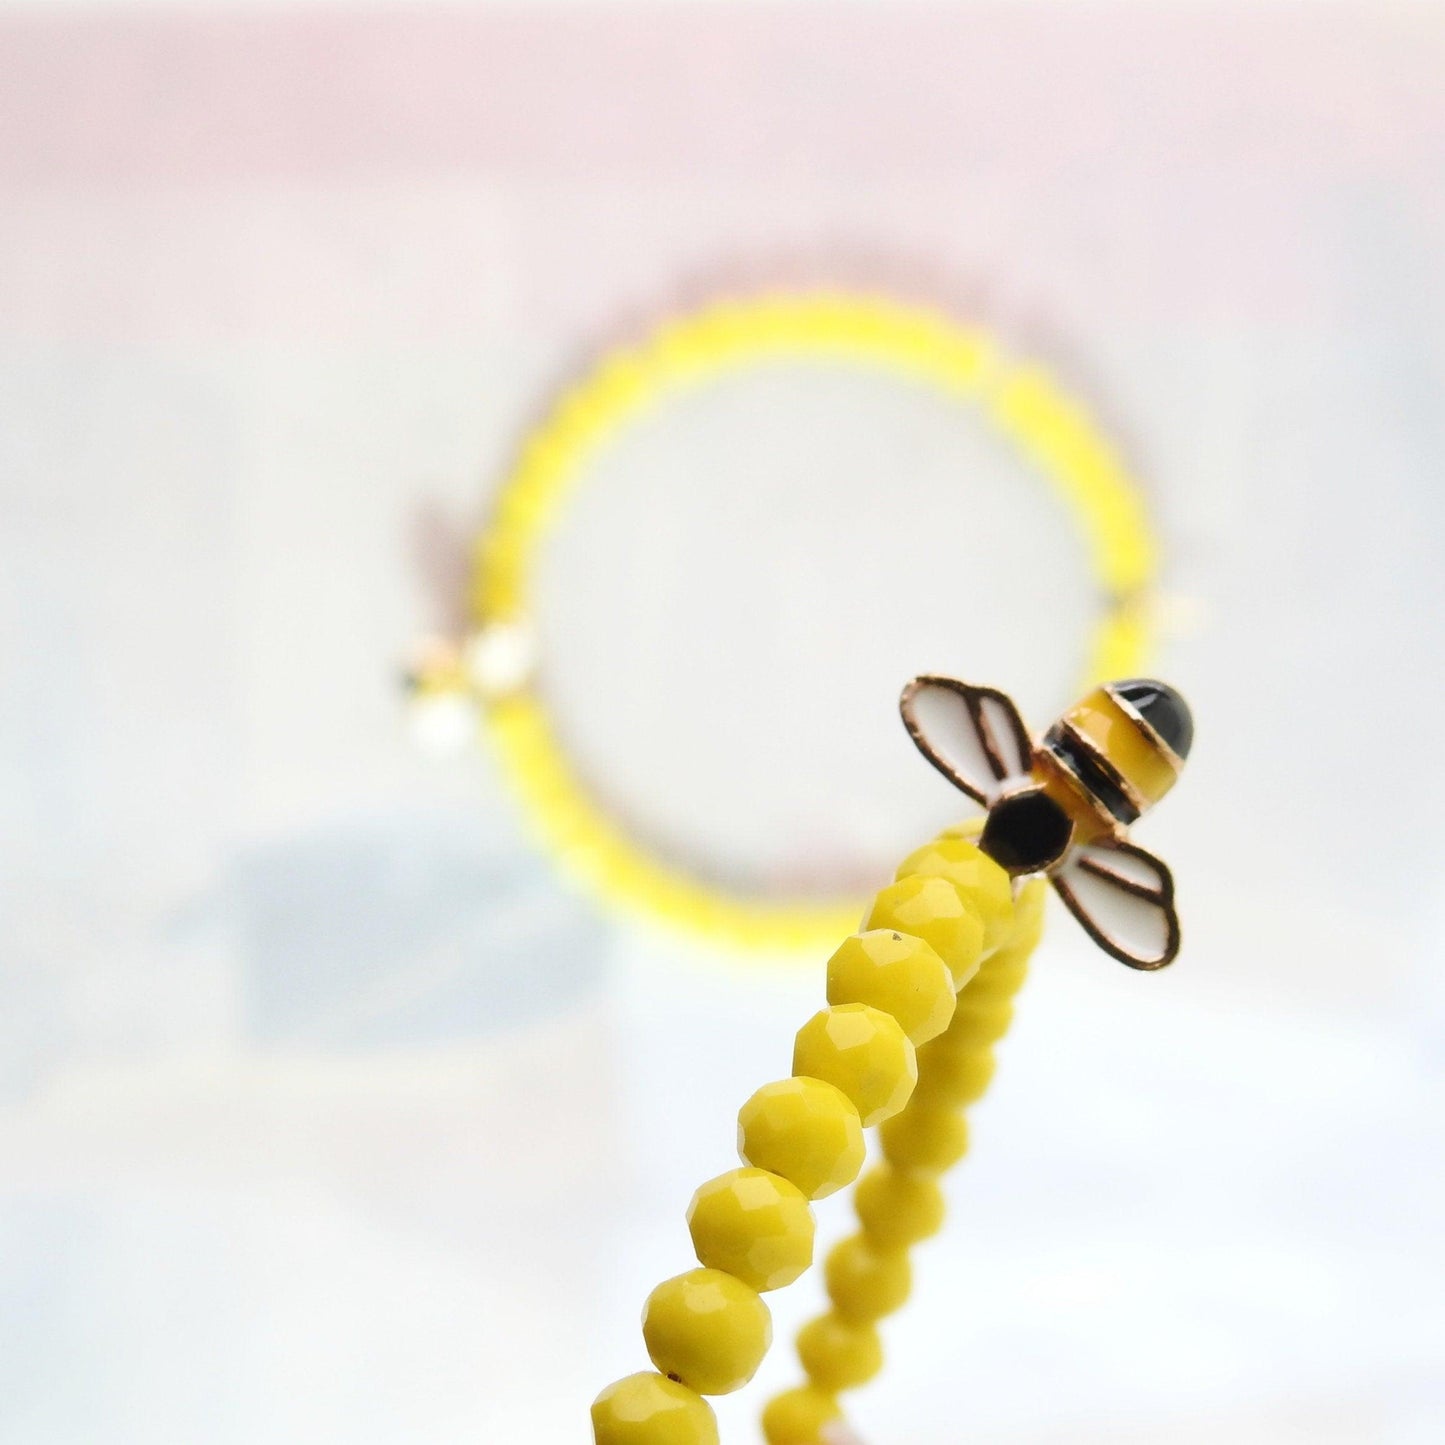 Honey bee earrings hoop for women, handmade in Canada with a cute bug charm and eye-catching yellow glass beads. Diameter about 45 mm, 2 in.